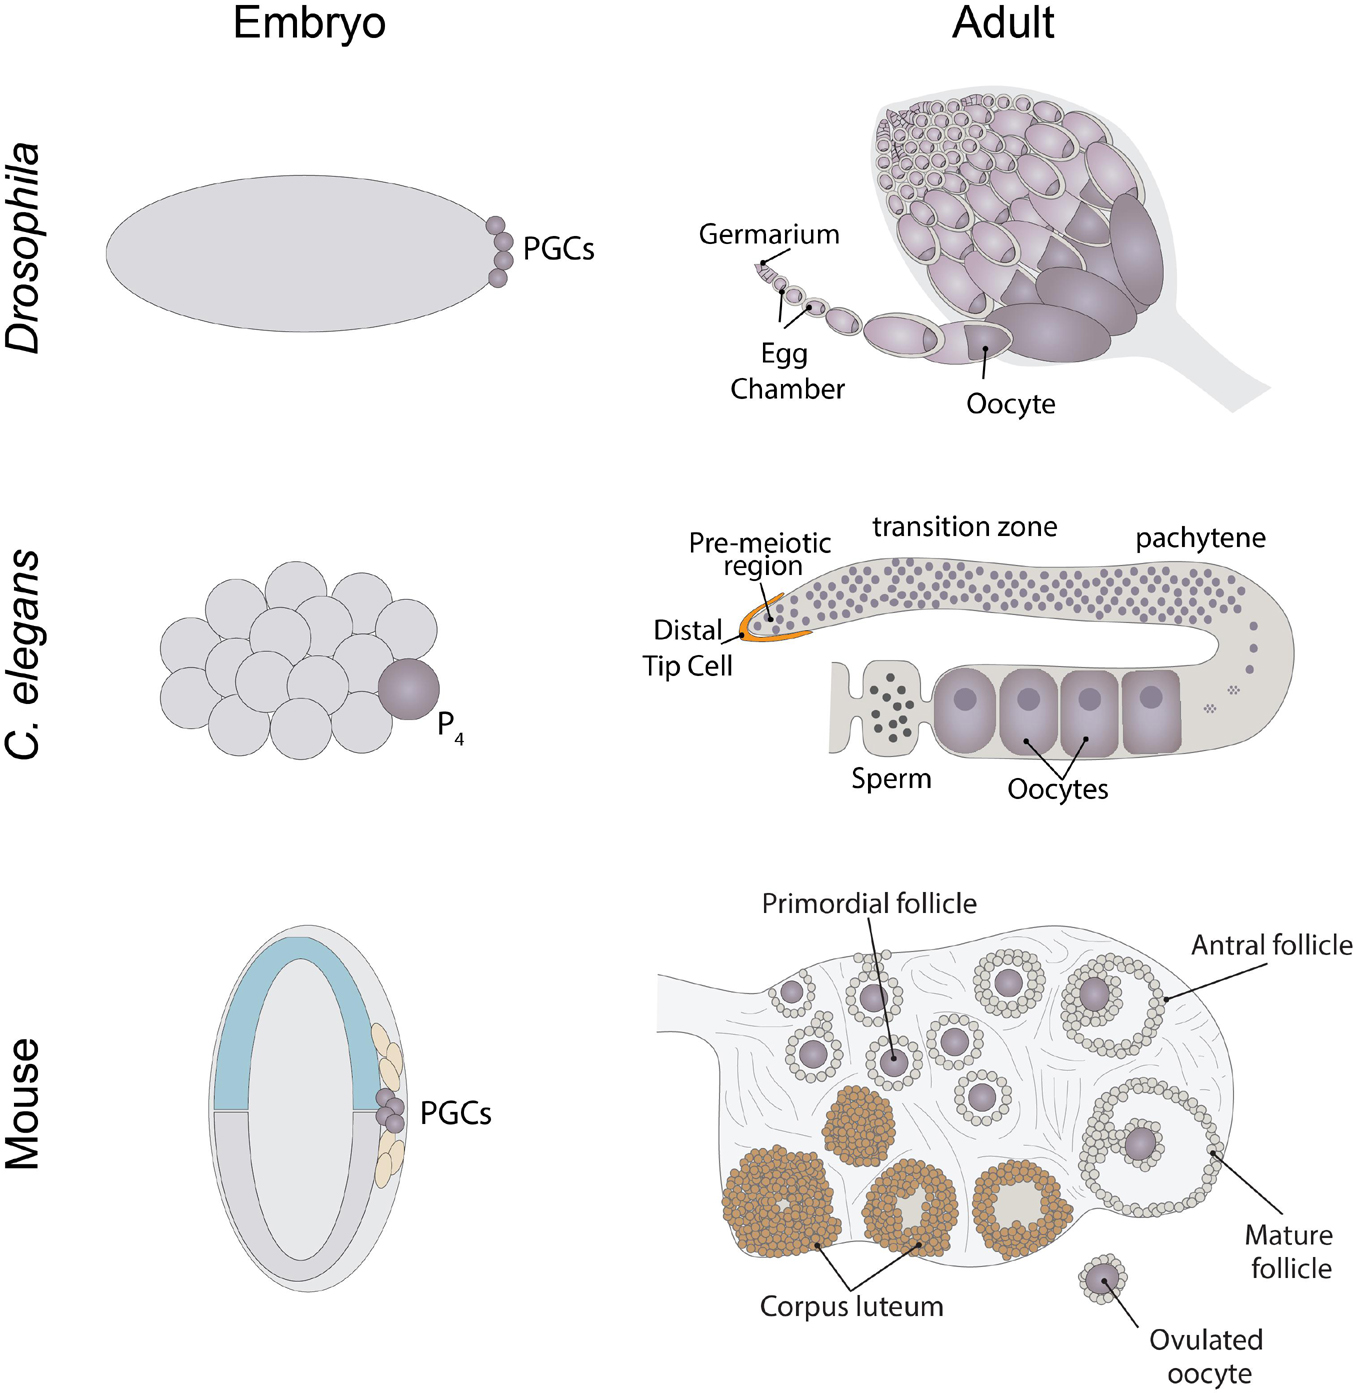 Frontiers The Dynamic Regulation Of Mrna Translation And Ribosome Biogenesis During Germ Cell Development And Reproductive Aging